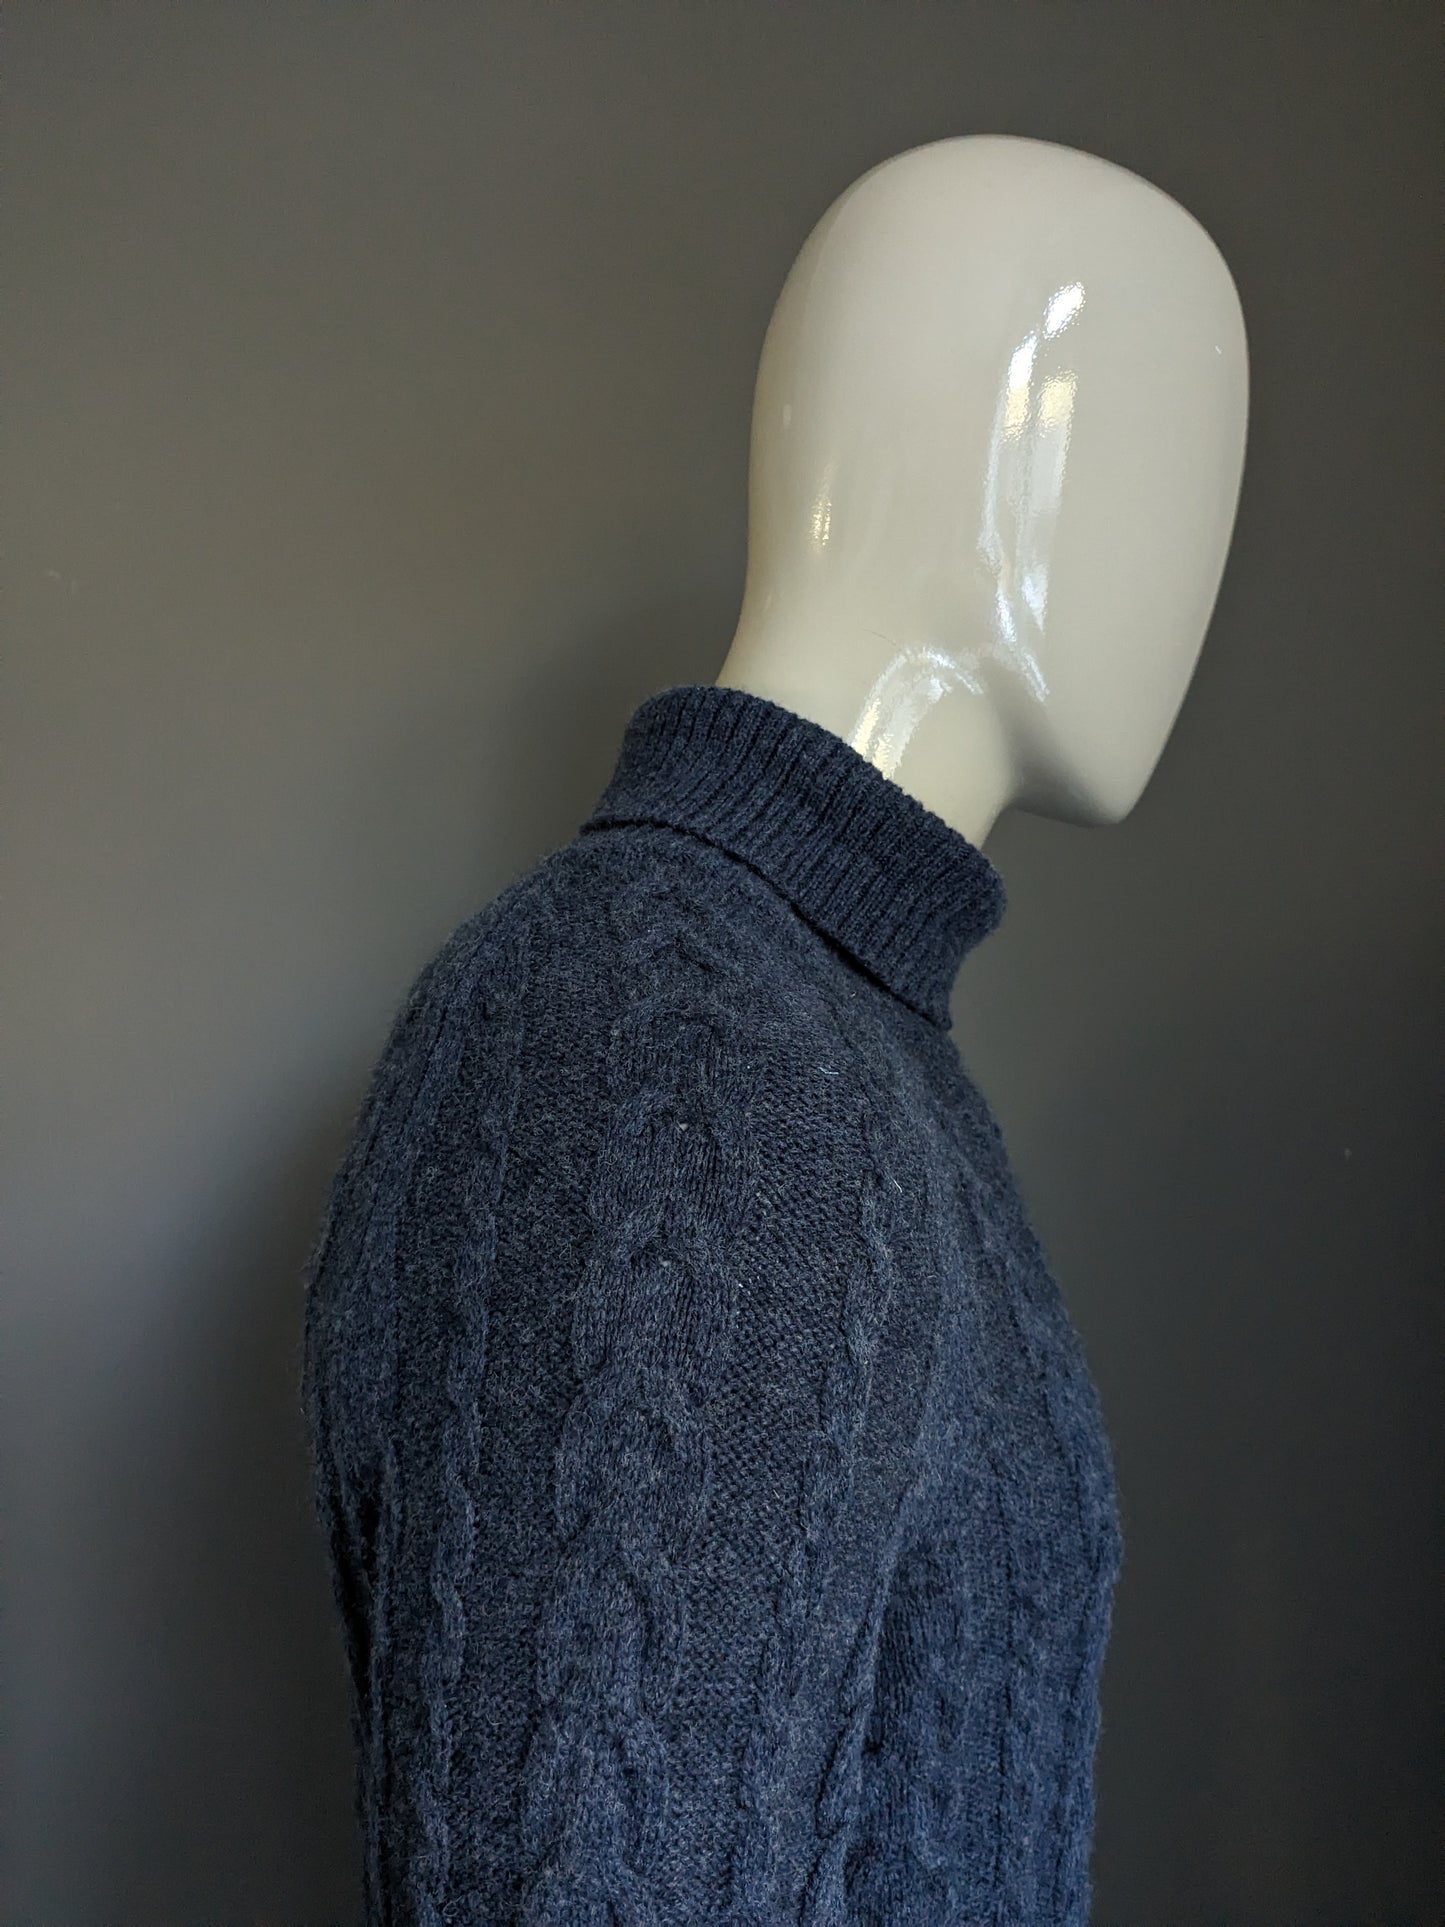 Selected homme woolen cable sweater. Dark blue gray mixed. Size L.